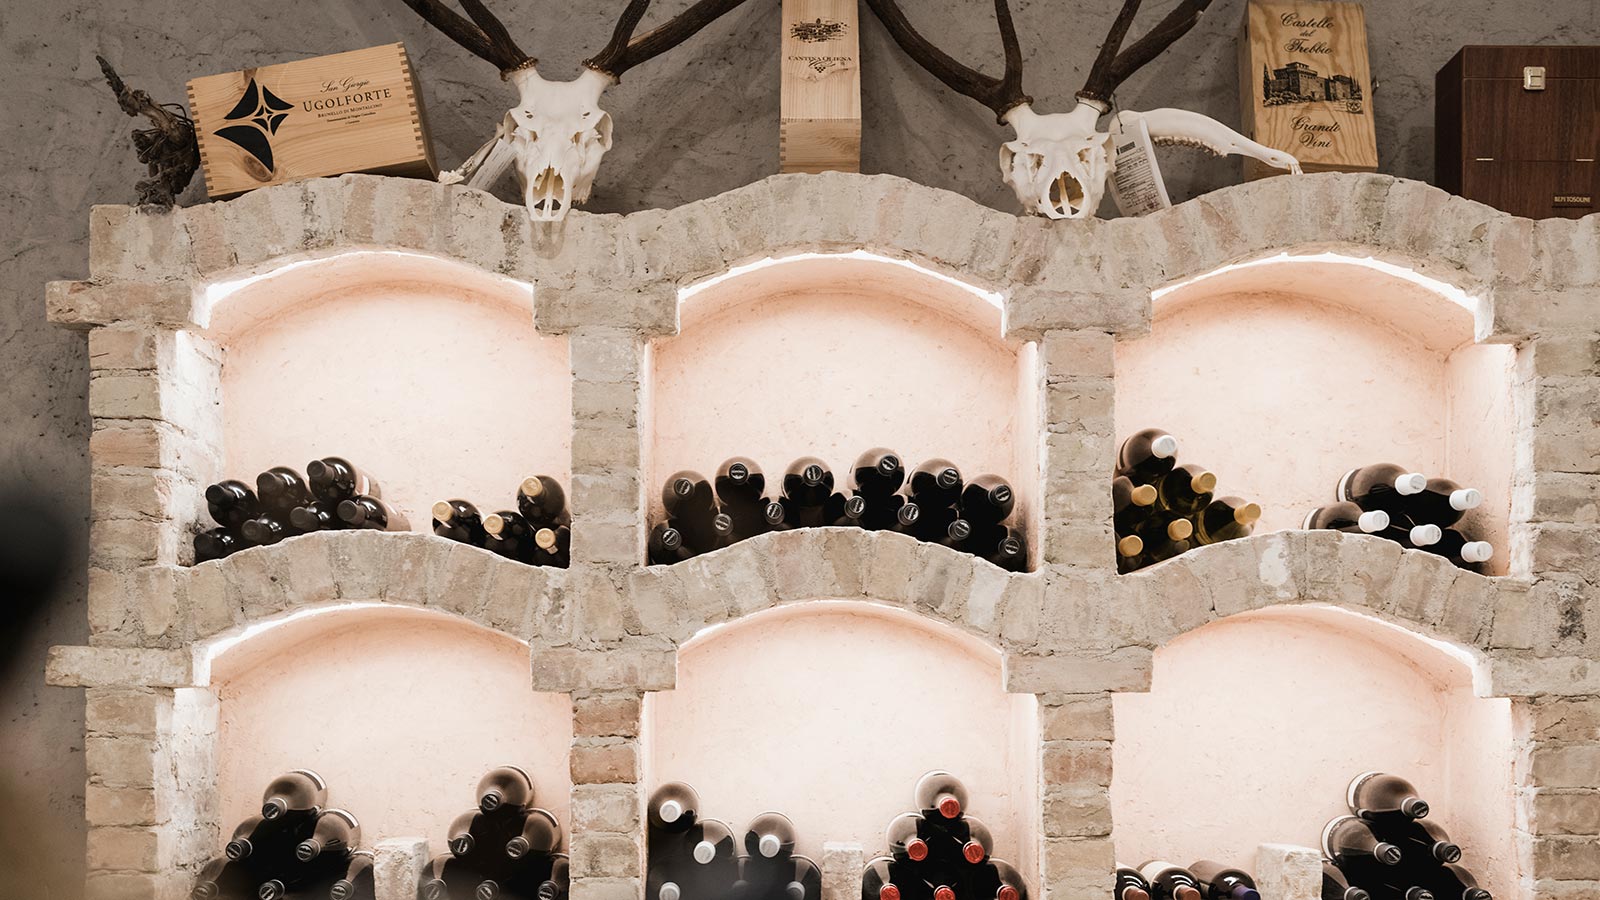 The wine cellar of the Hotel Laguscei with some deer antlers in the background